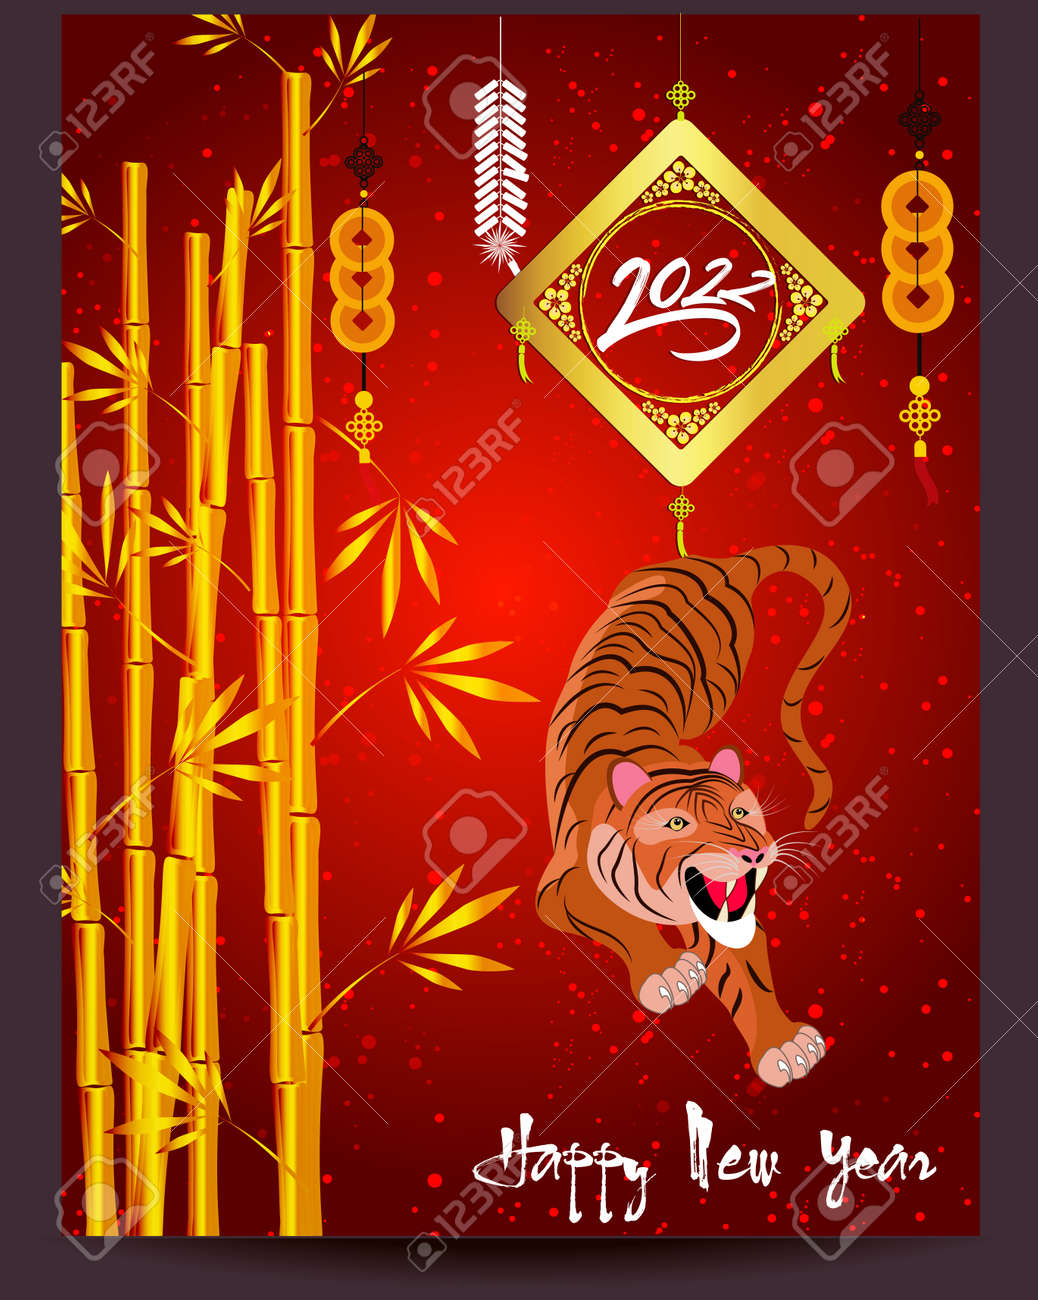 Lunar New Year 2022: What to know about the Year of the Tiger